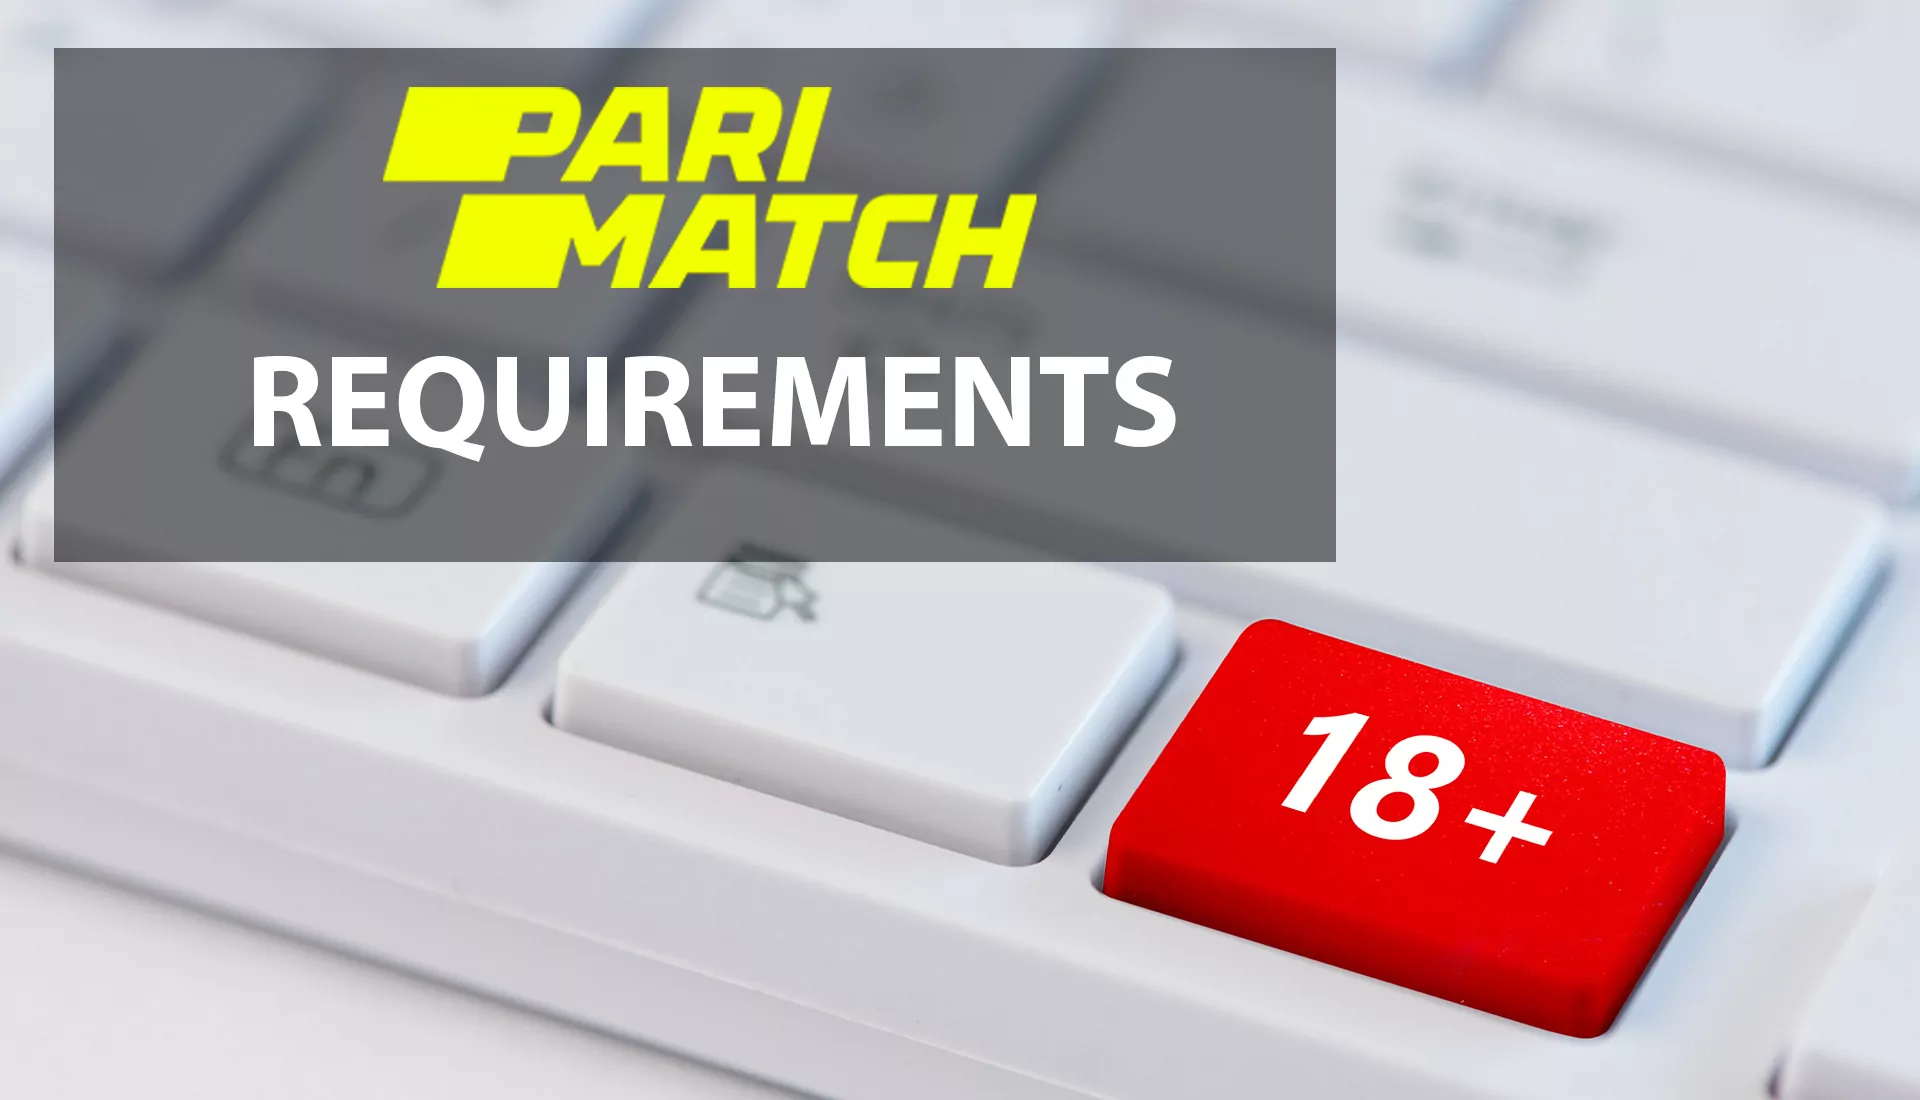 You should follow seom requirements to betting on Parimatch